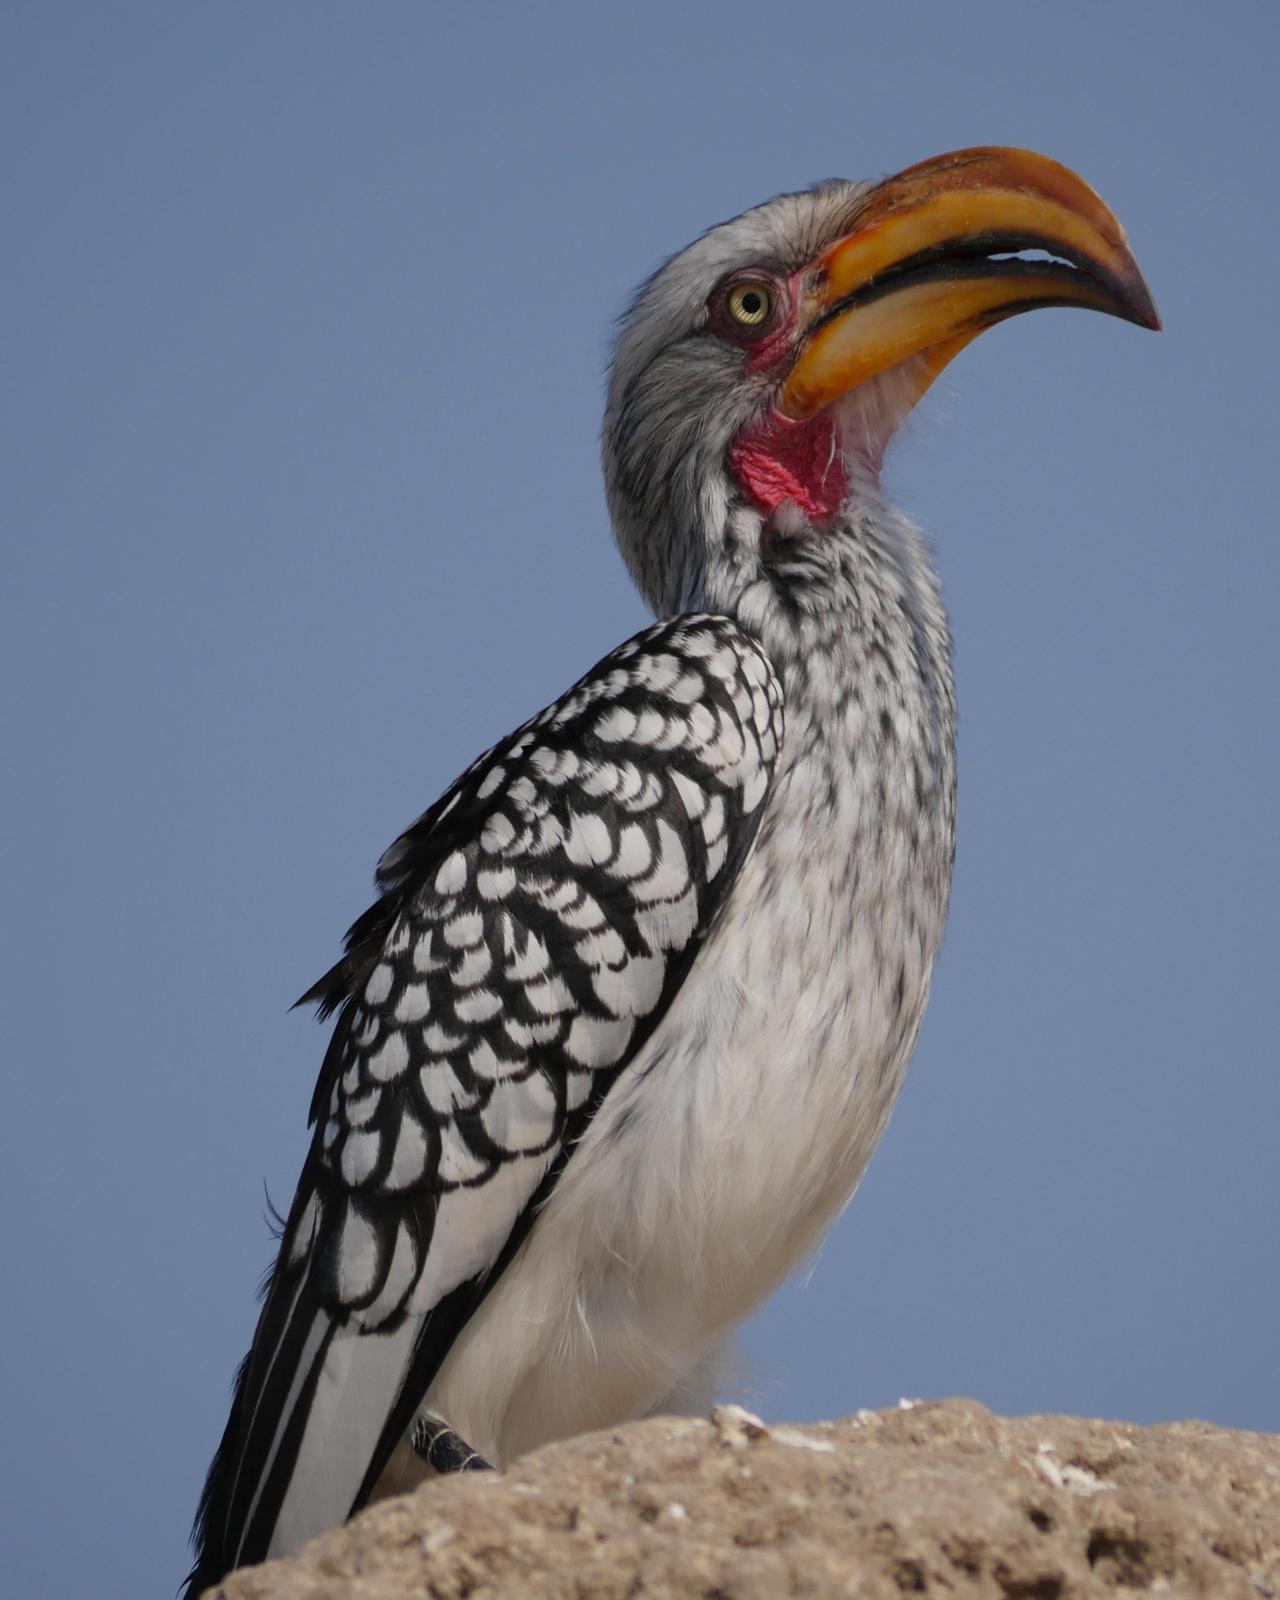 Southern Yellow-billed Hornbill Photo by Peter Lowe